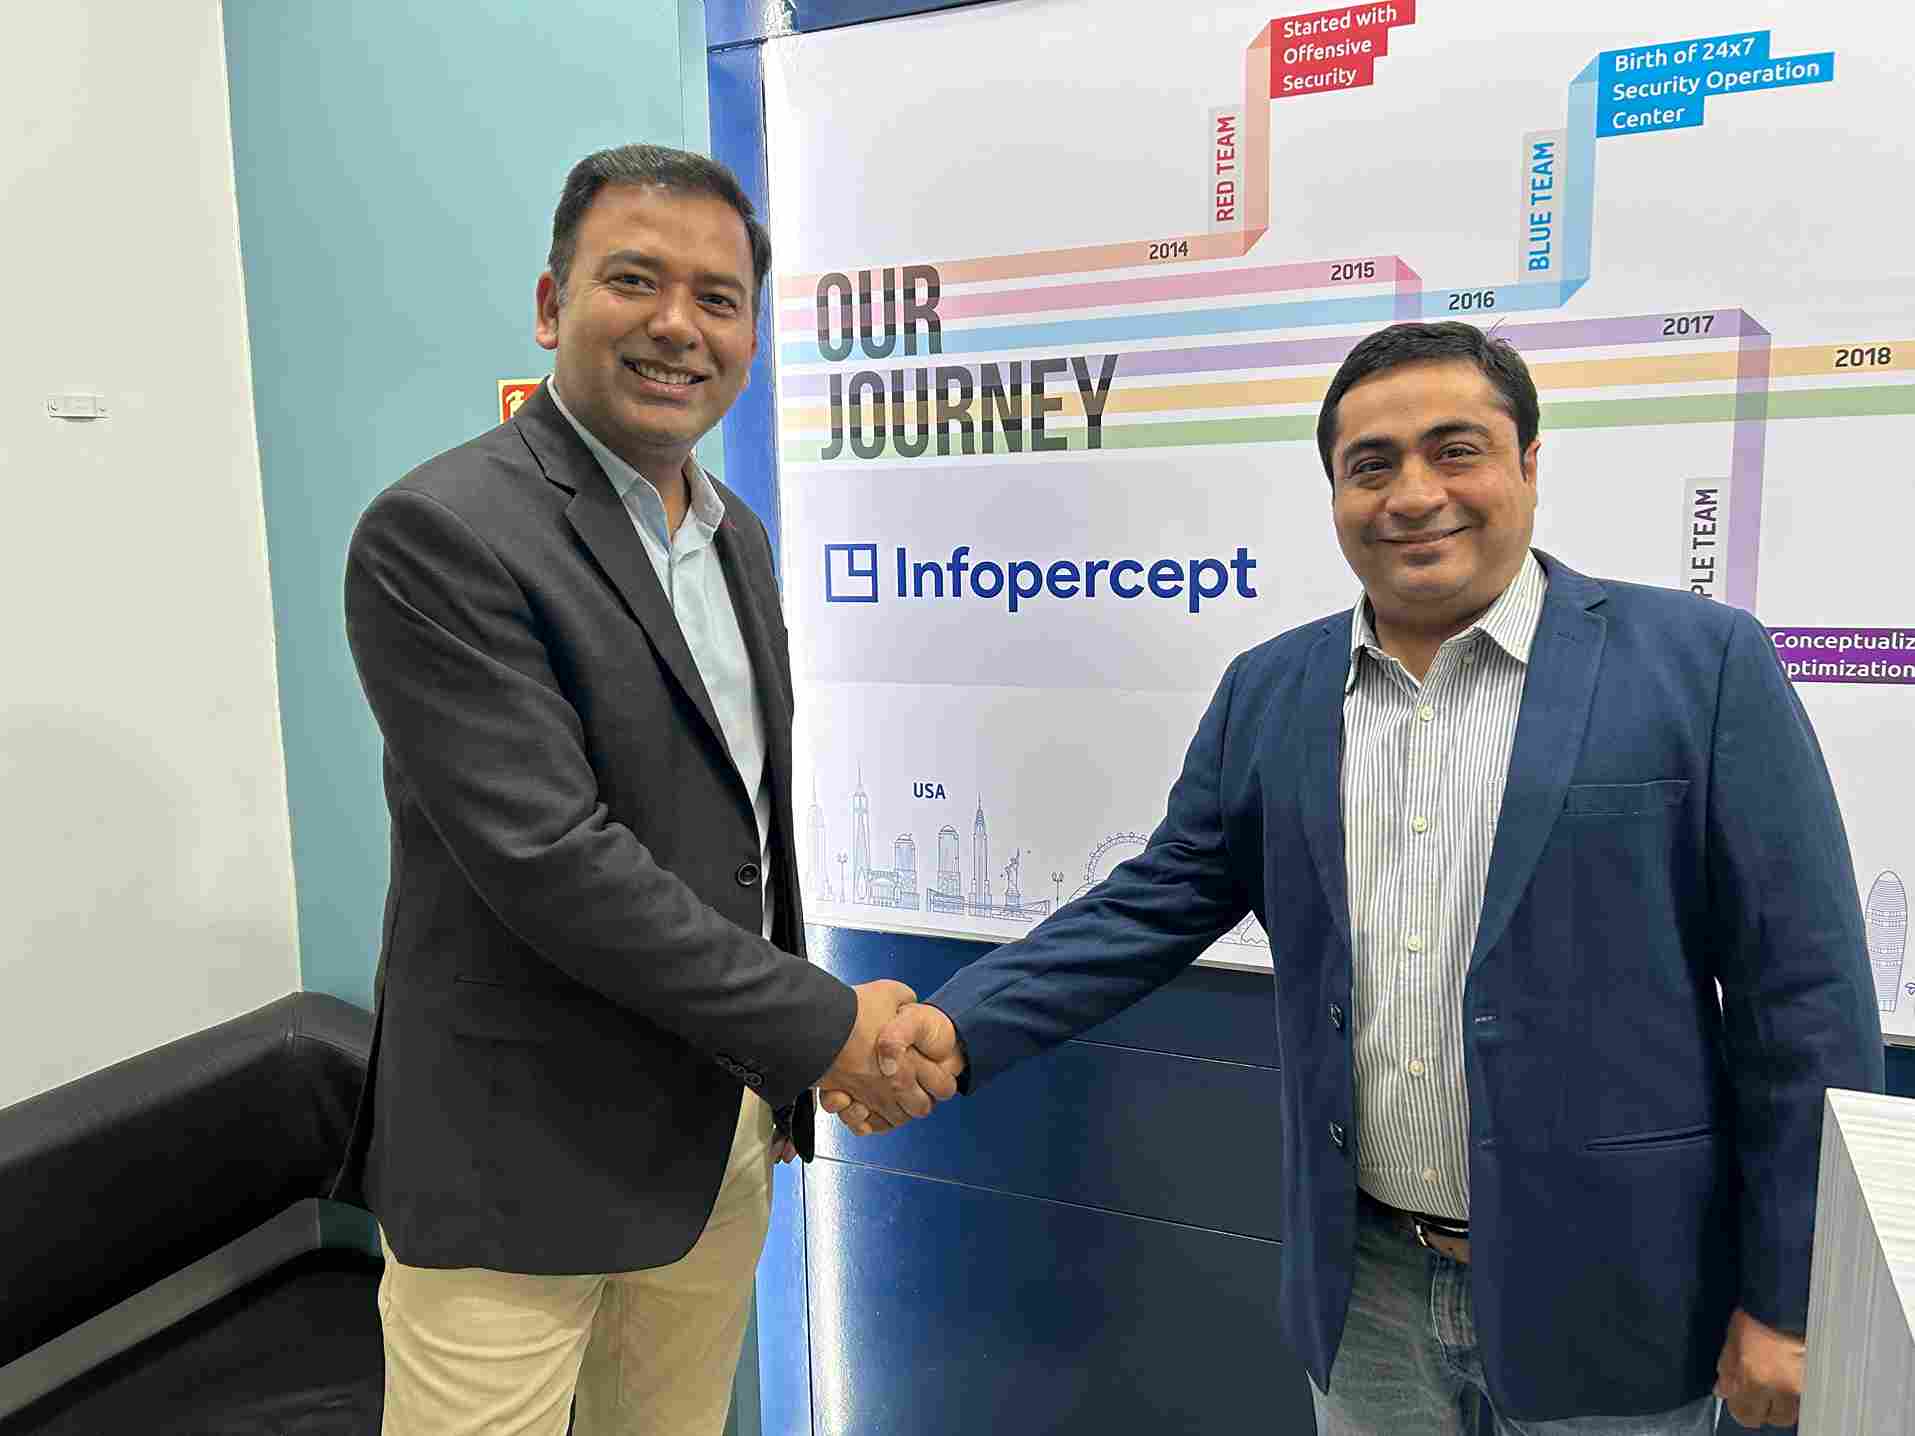 Infopercept Appoints Prashant Pratap Singh as Director of Sales for Government and PSU Business